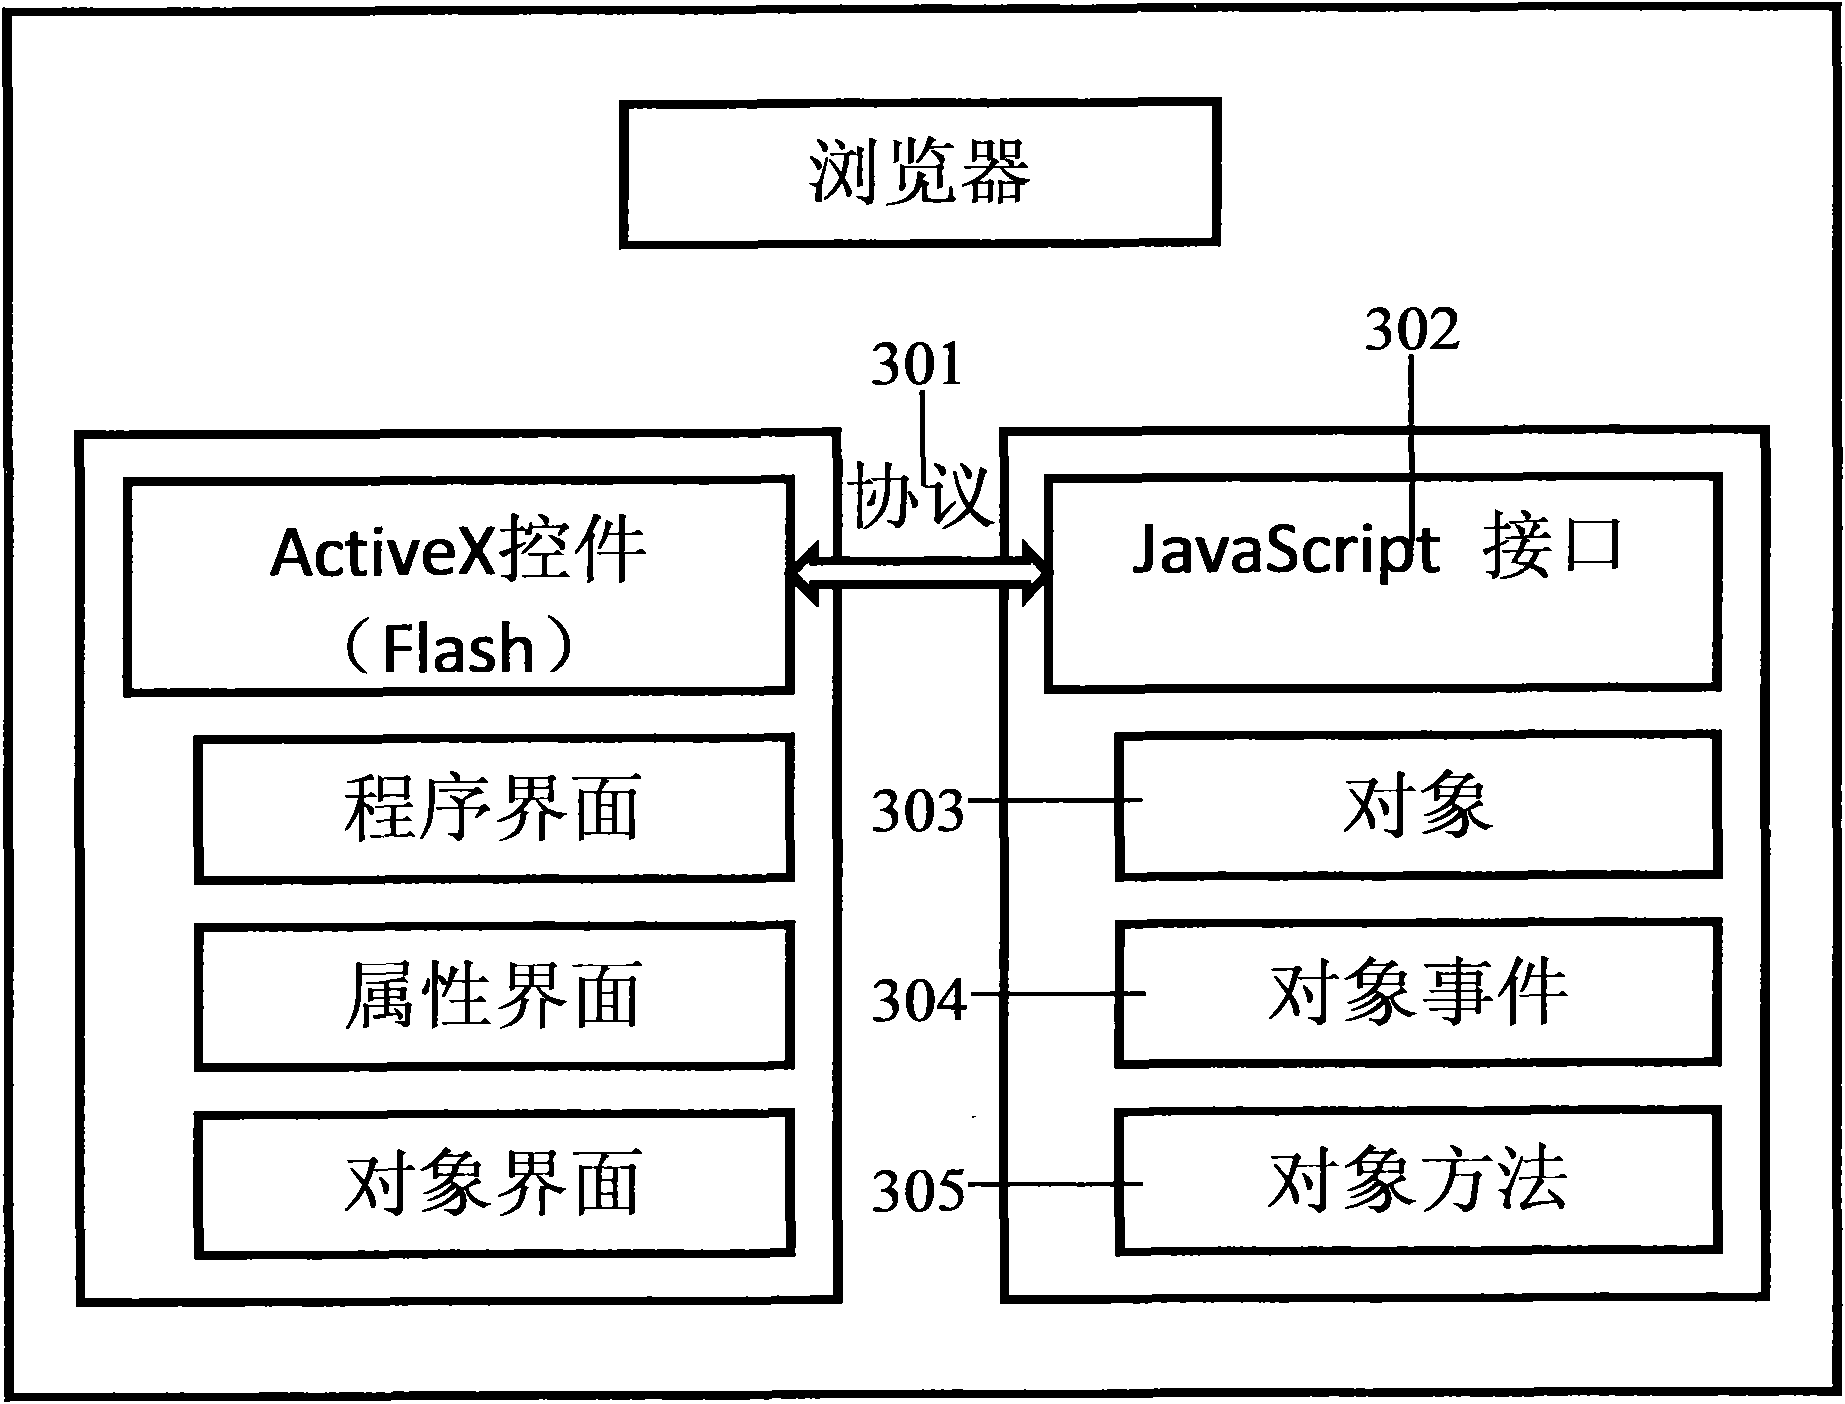 Method and system for constructing and generating web page